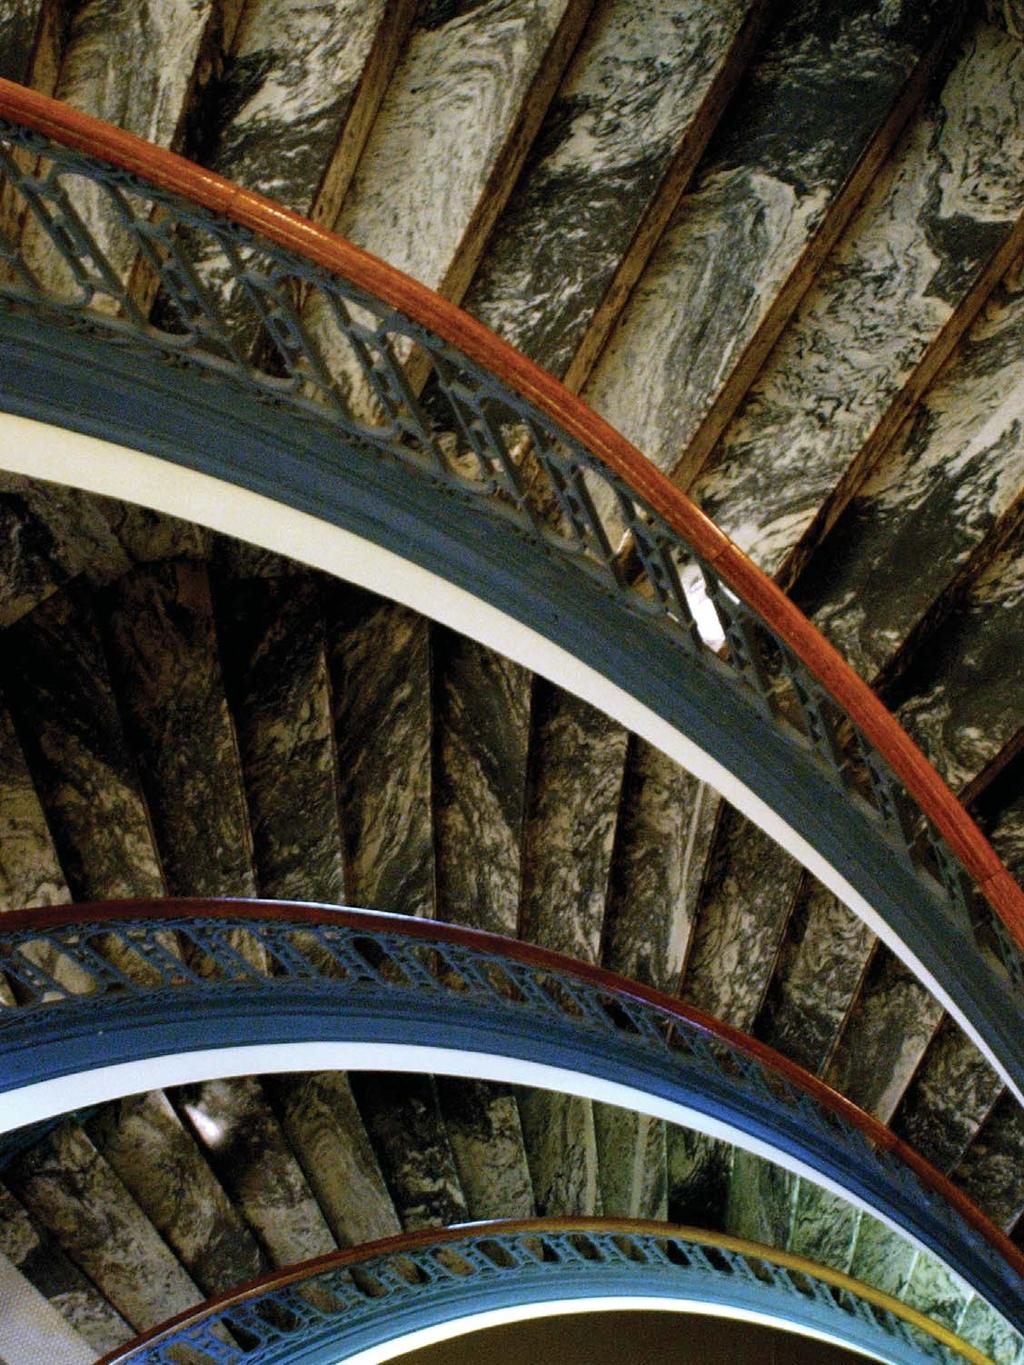 The elegant stone and metal work of this spiral staircase is indicative of the prosperity and permanence that